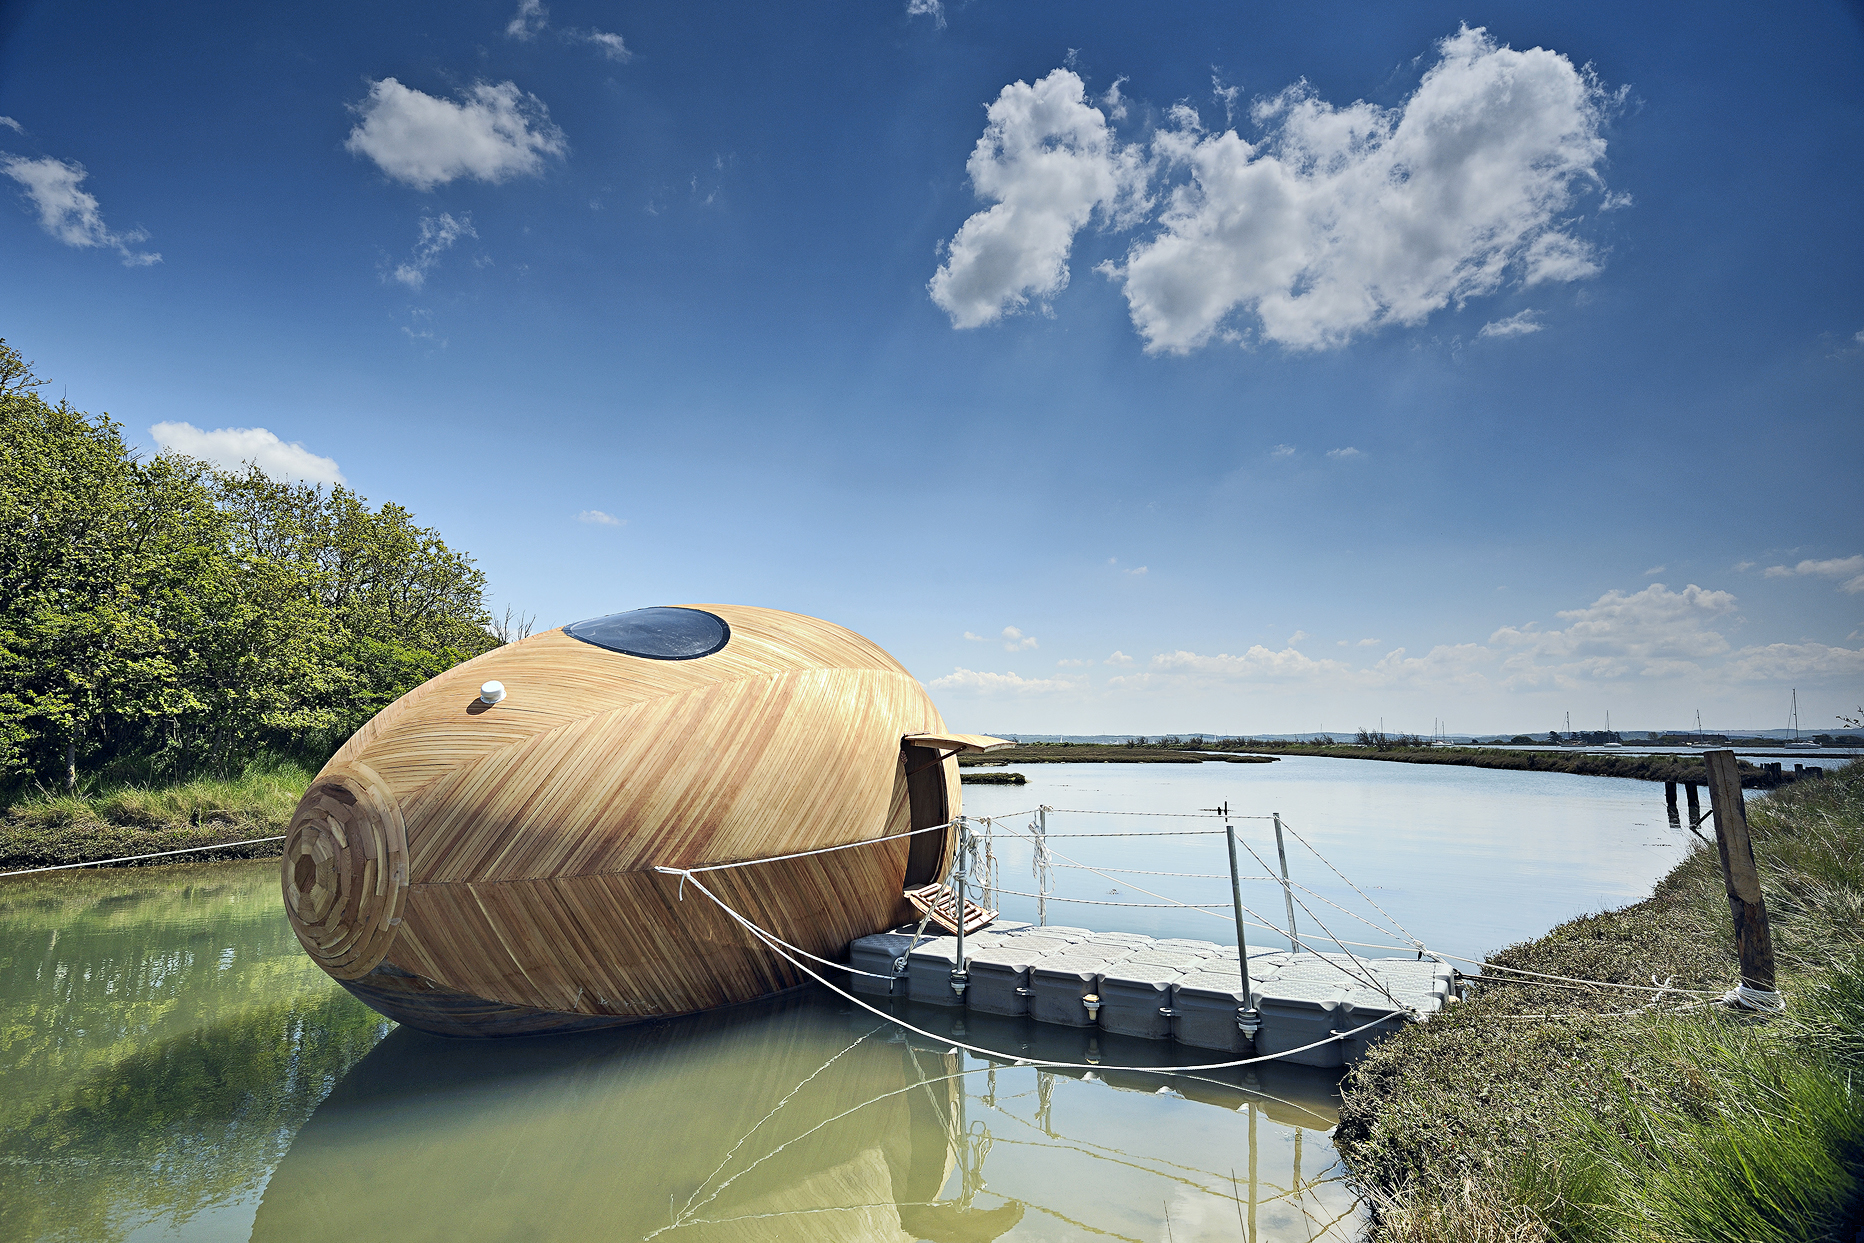 Artist Stephen Turner has spent a full year living aboard the experimental dwelling he built, which floats along southern England’s Beaulieu River. Its wooden exterior is tethered to the shore like a boat and houses a bed, worktable, kitchen and bathroom.